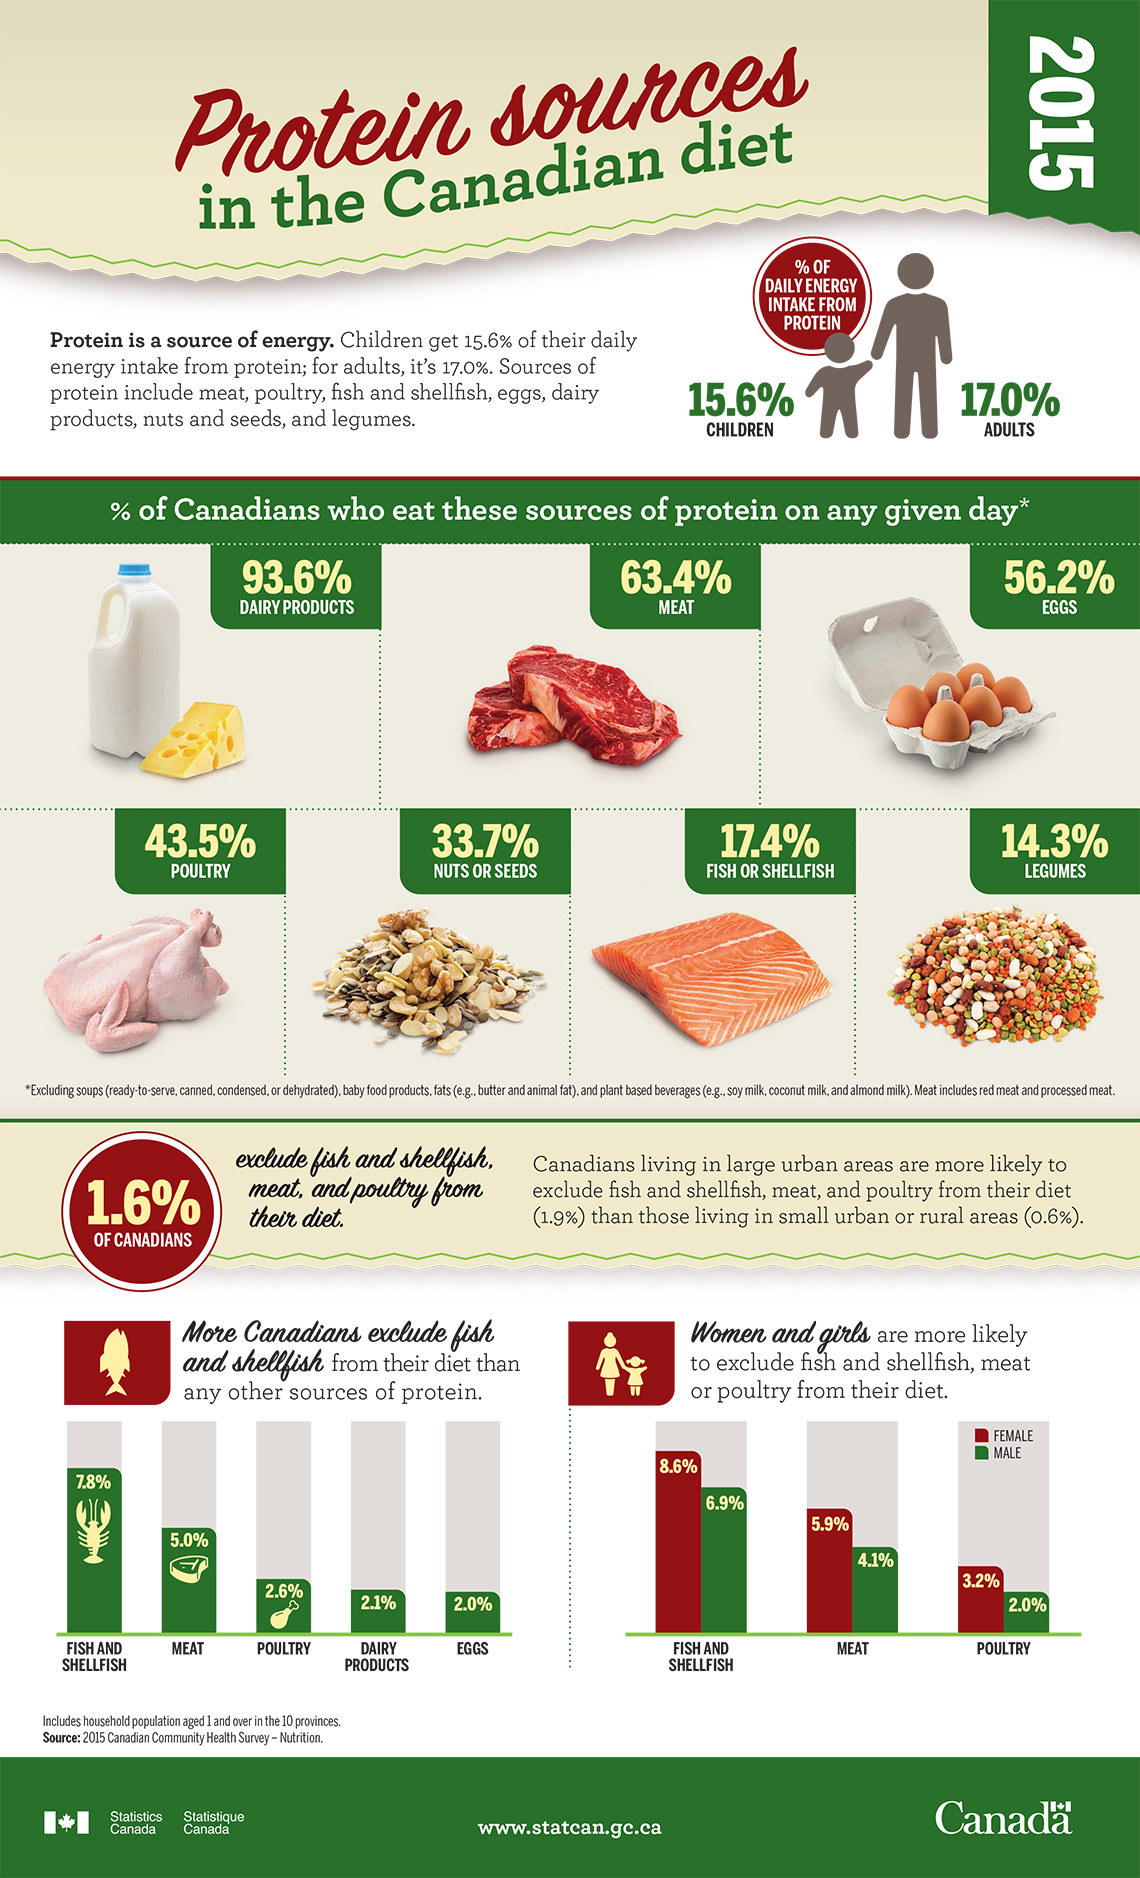 Protein sources in the Canadian diet, 2015